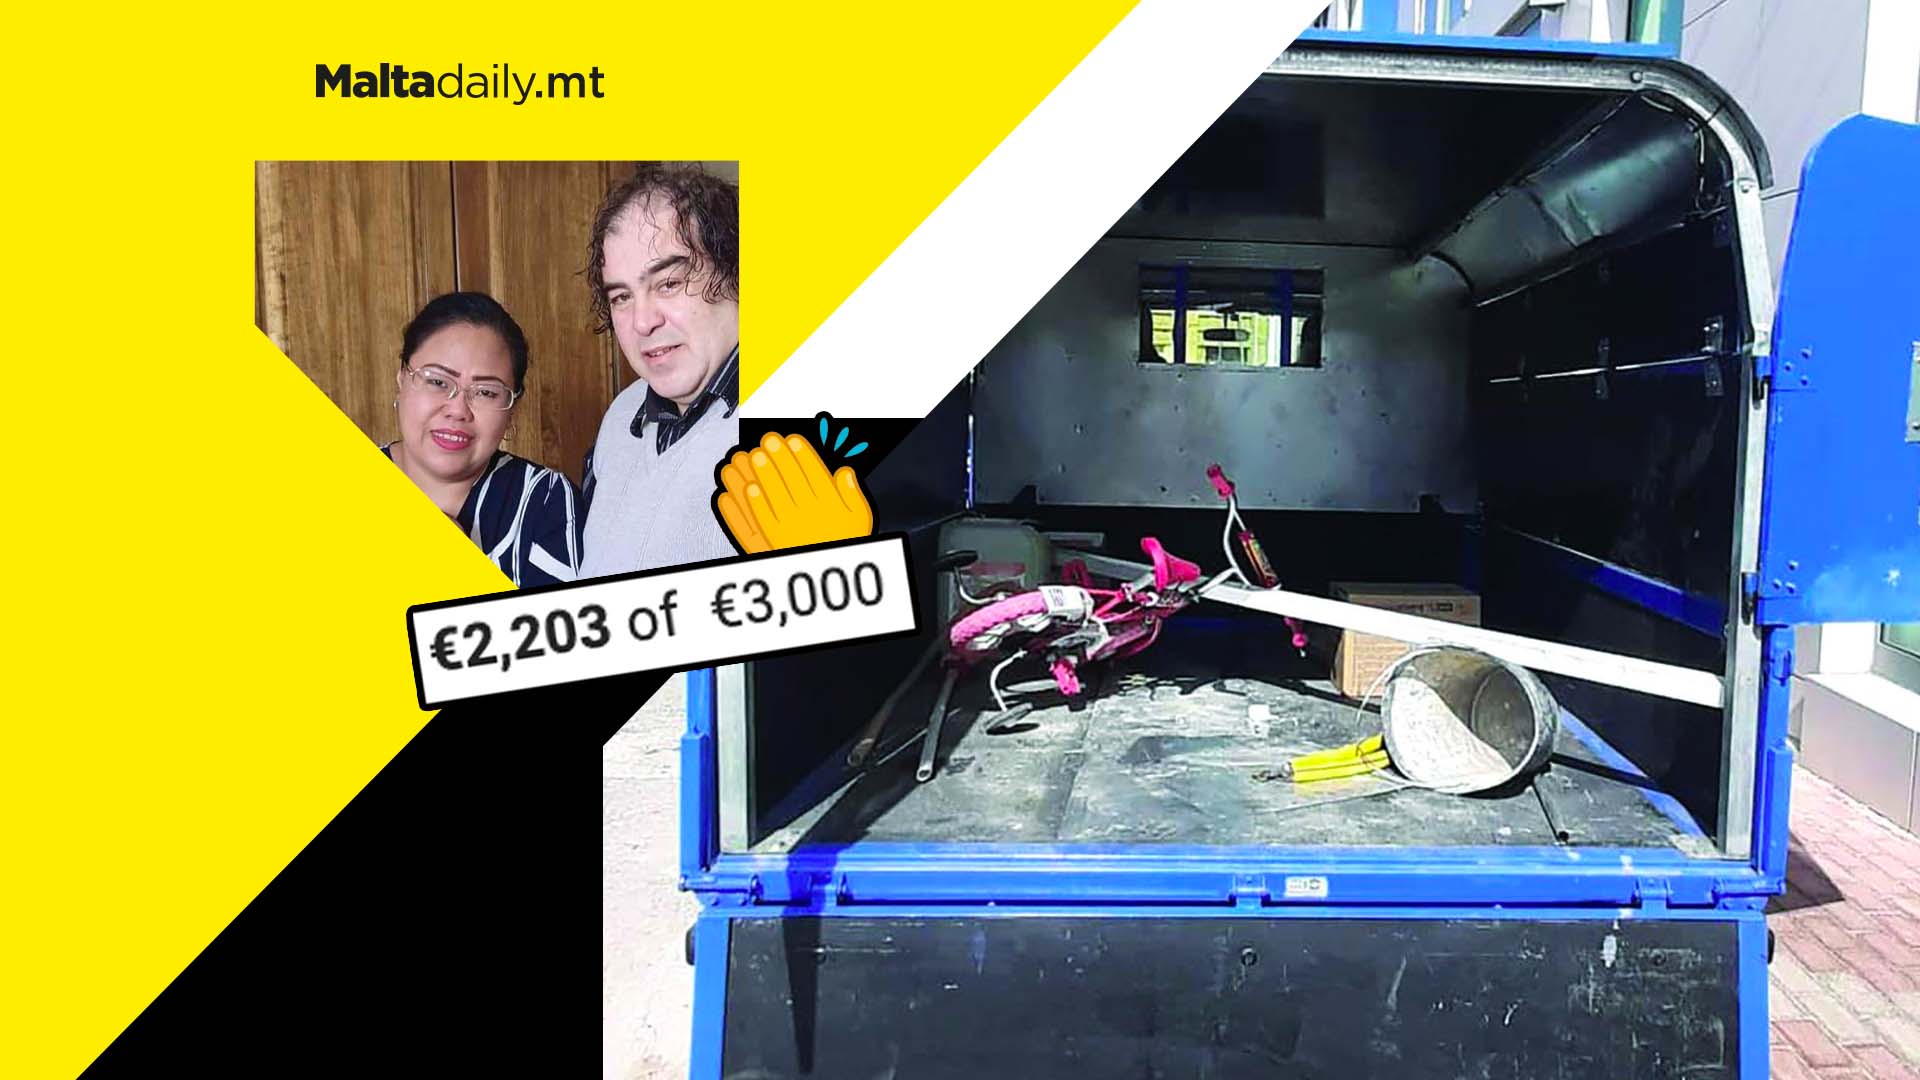 Over €2,200 raised for aspiring plumber whose tools were stolen